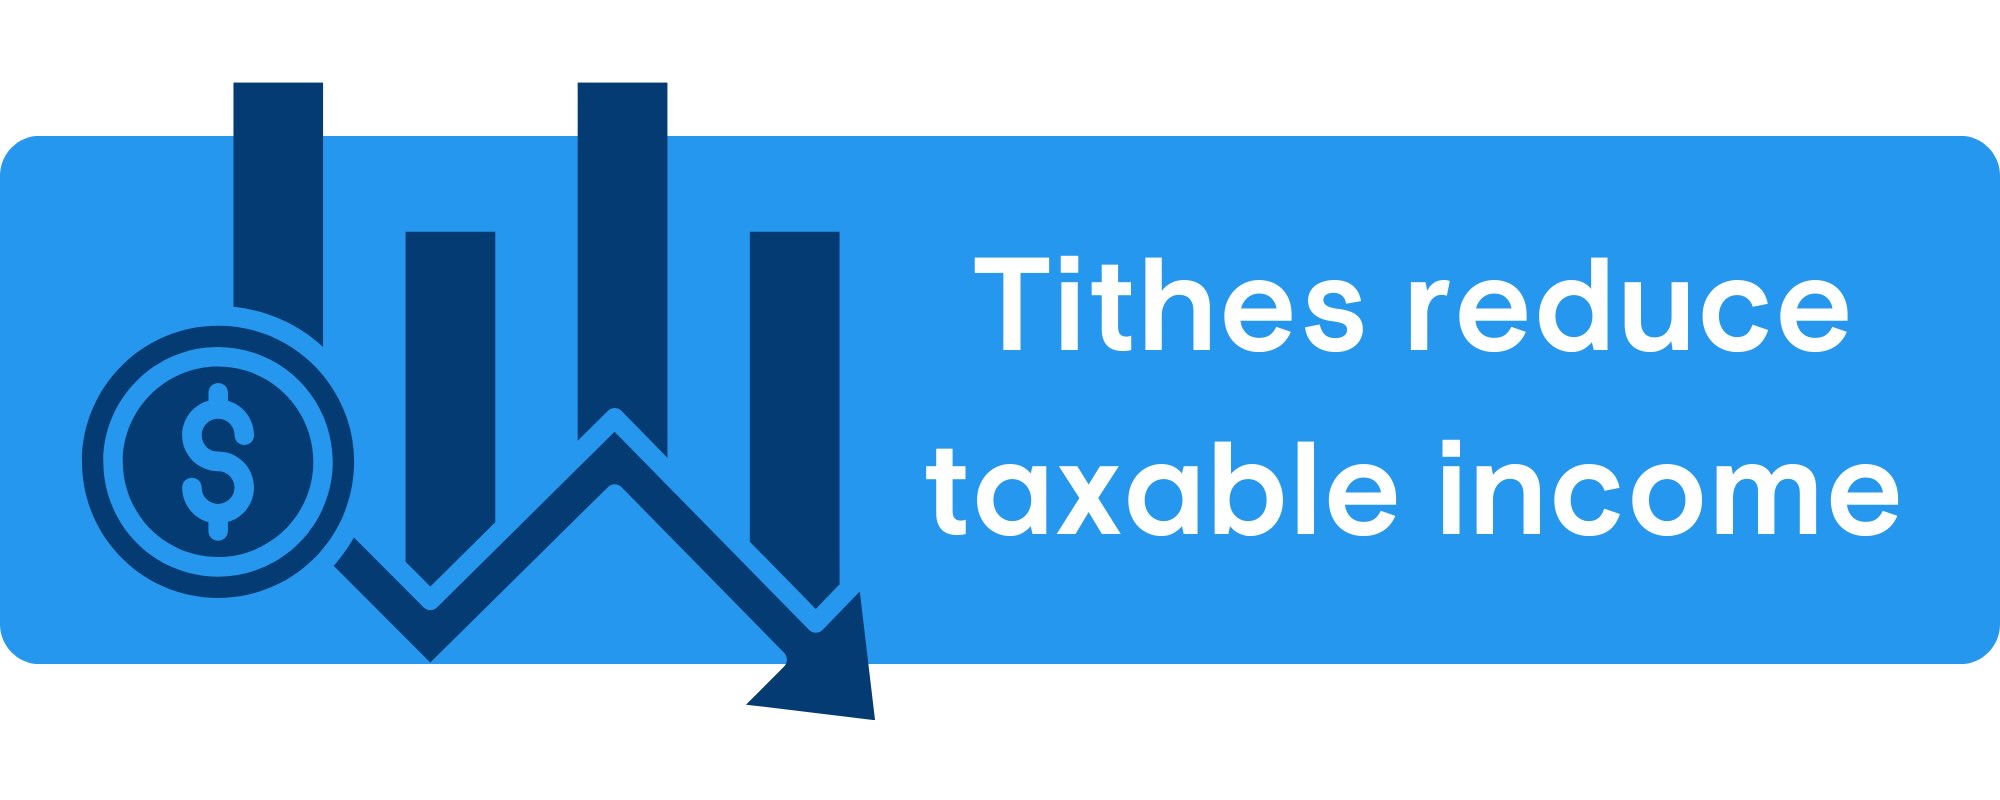 Is tithing tax deductible? Yes, but they are not a tax credit